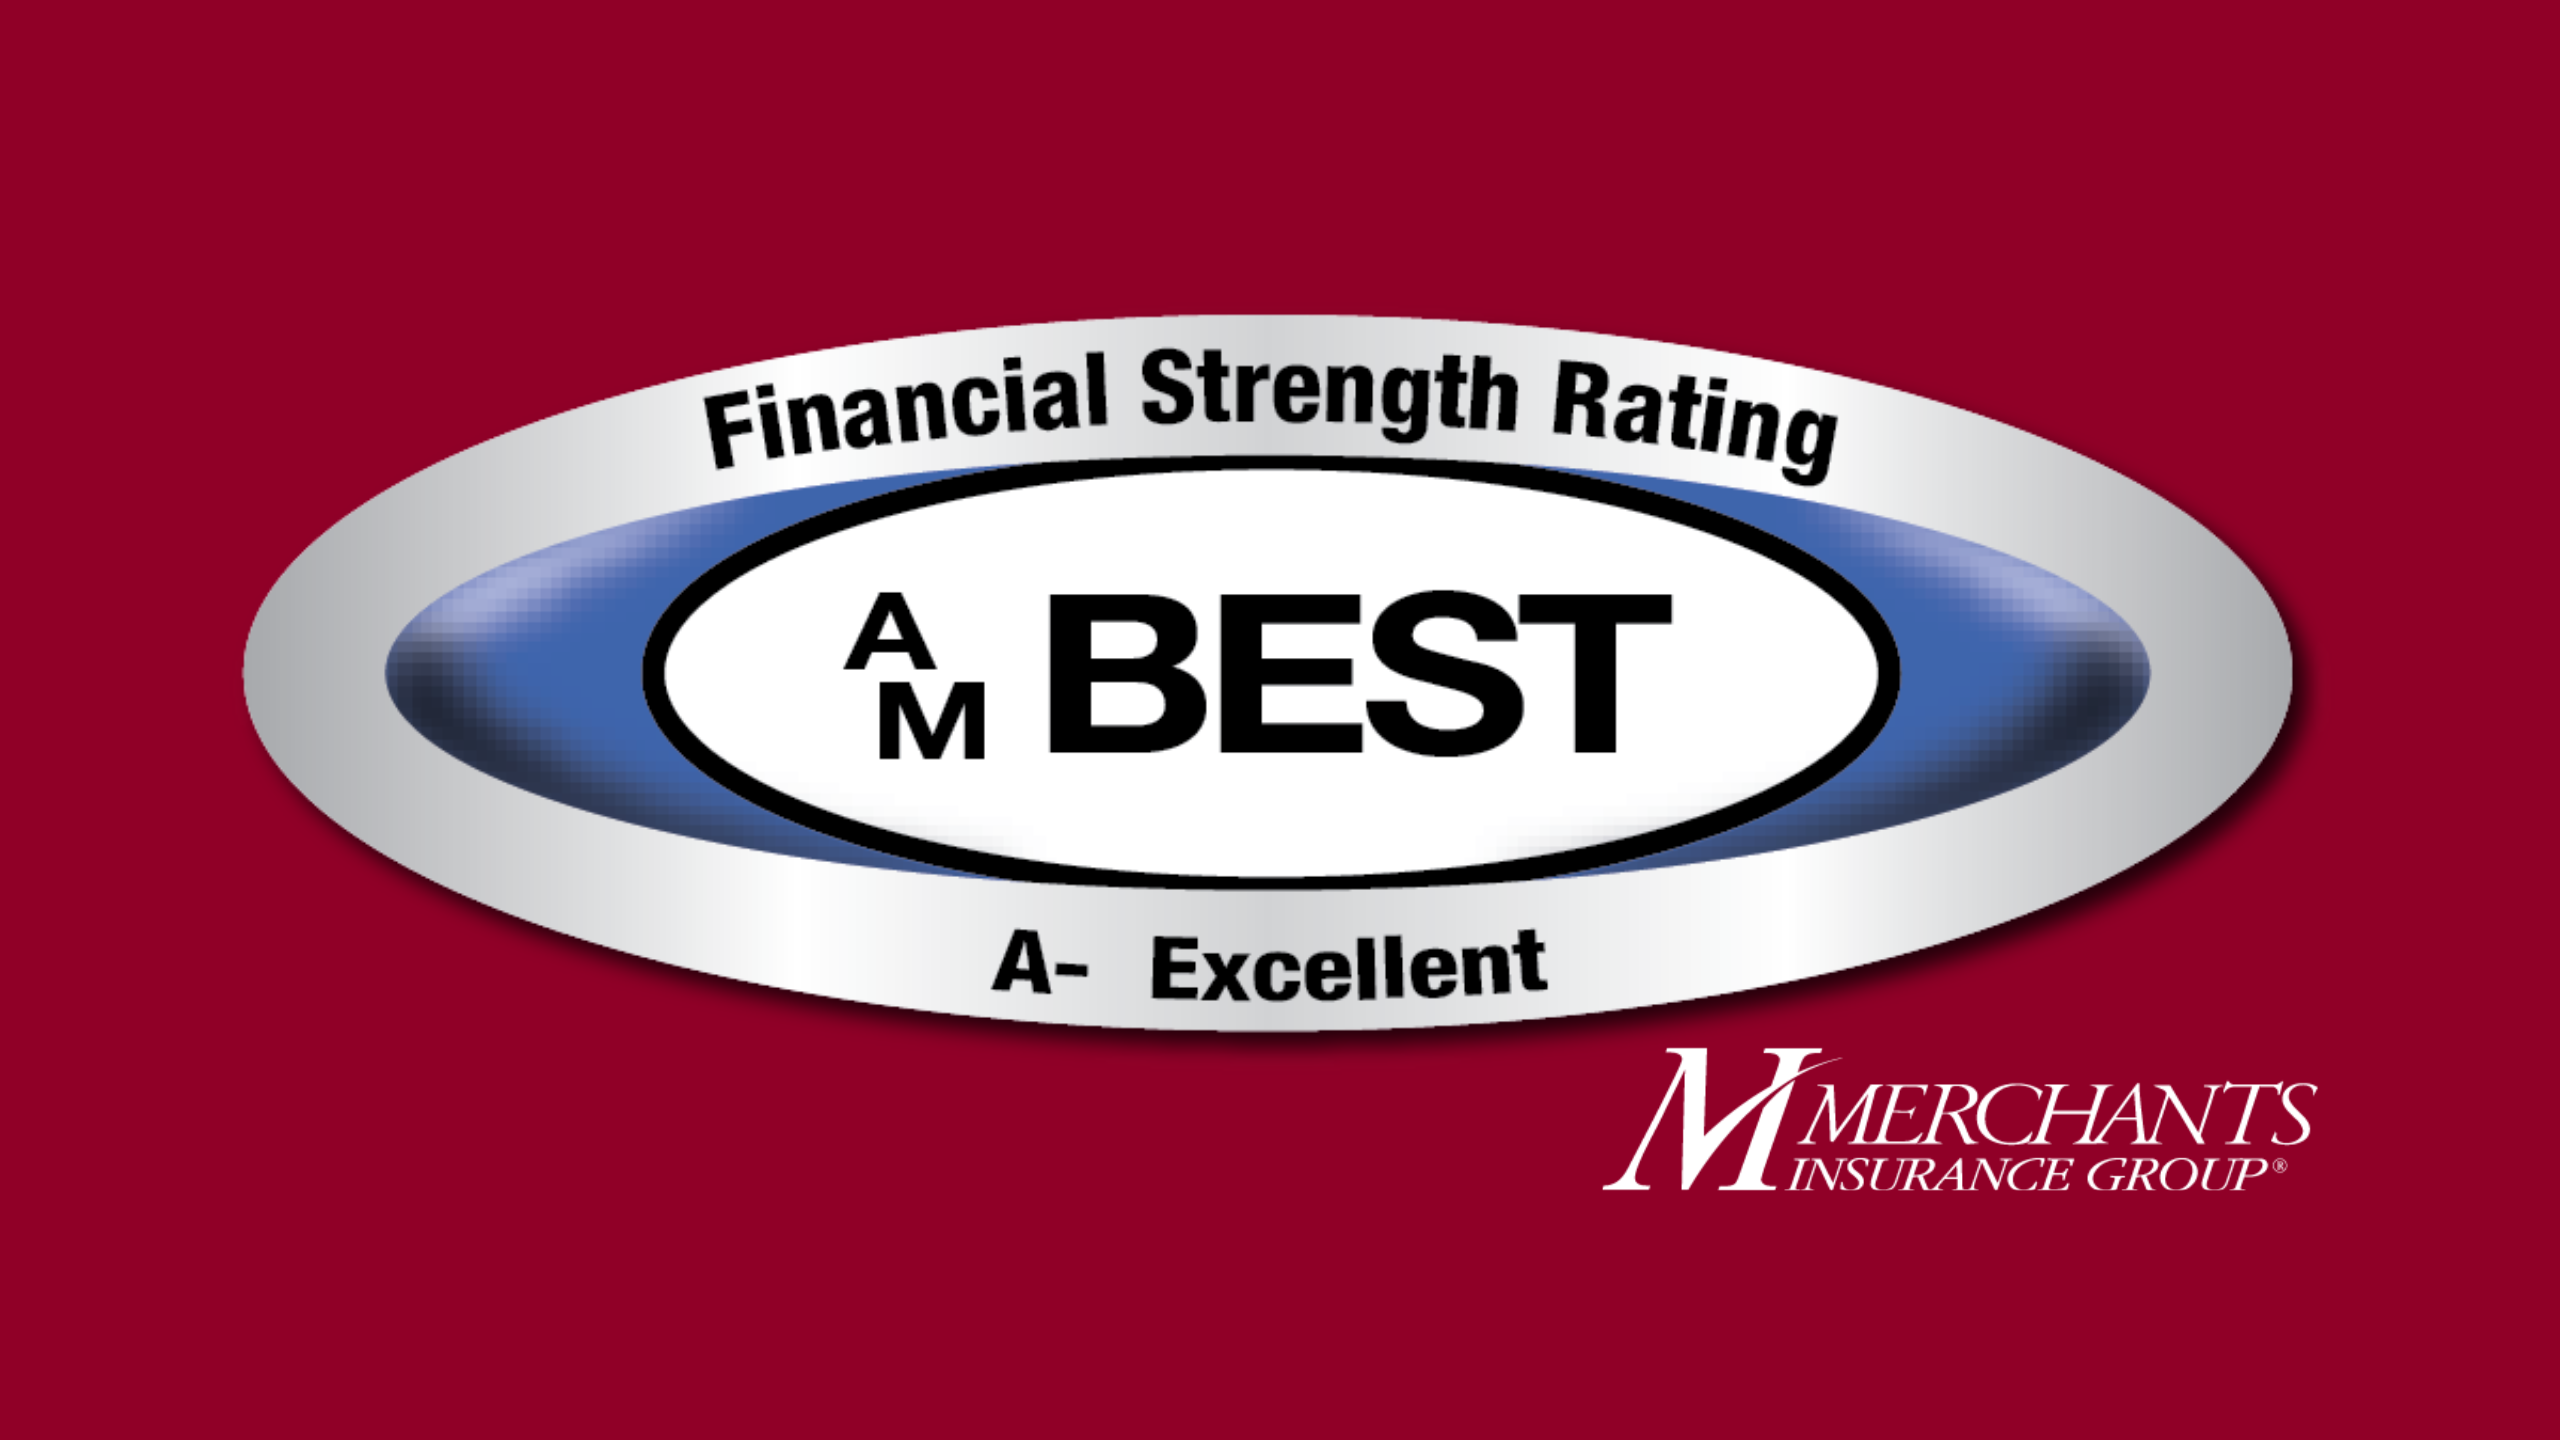 Merchants Insurance Group Companies A Rating Affirmed By A M Best 